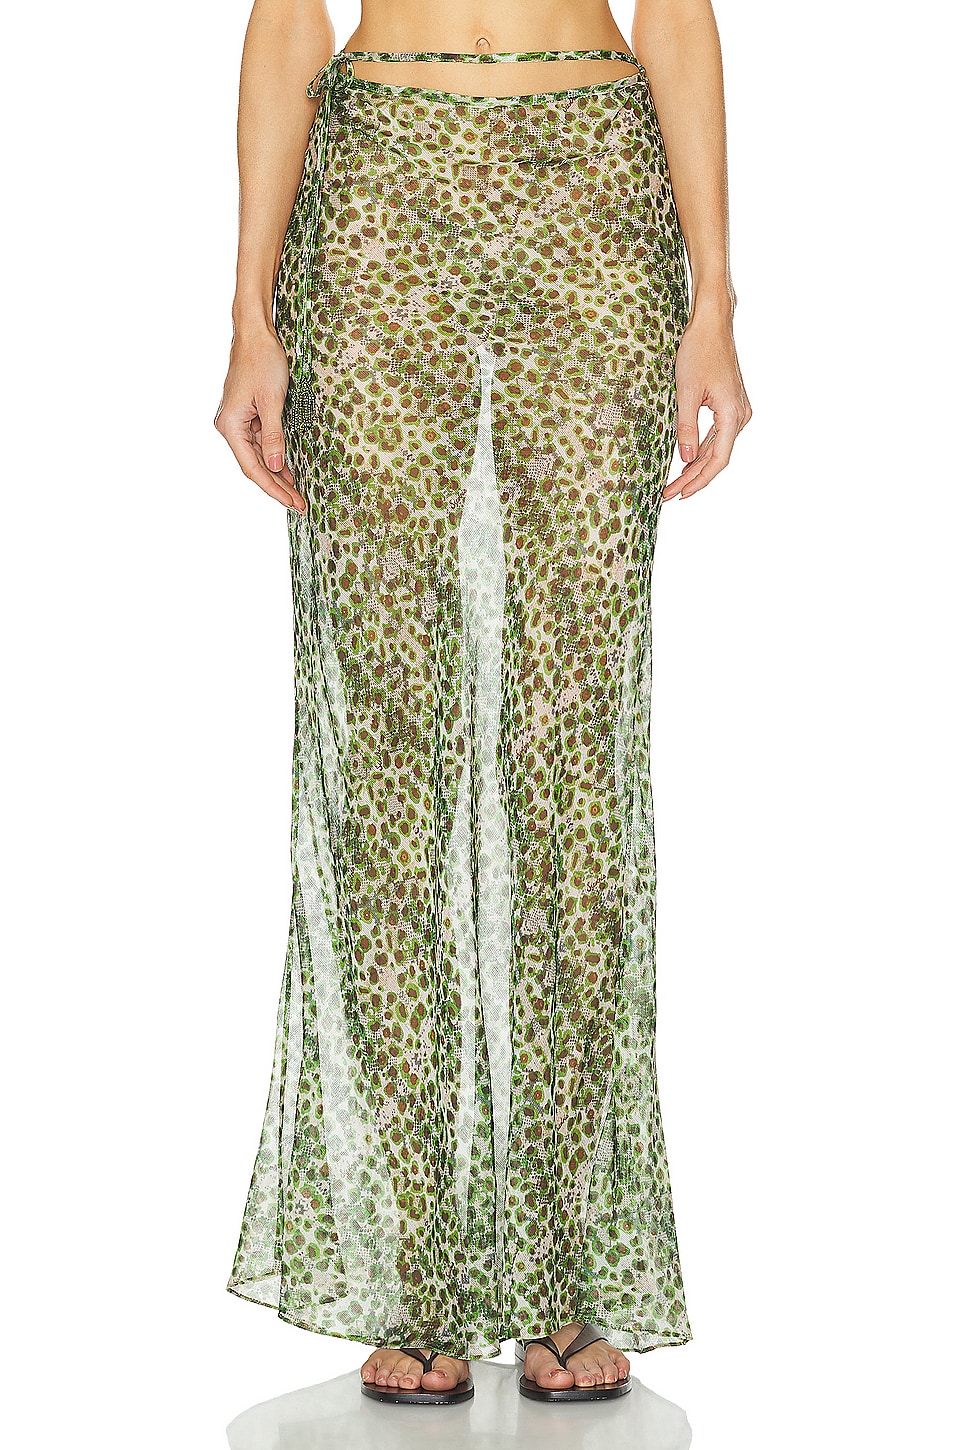 Siny Maxi Skirt in Green